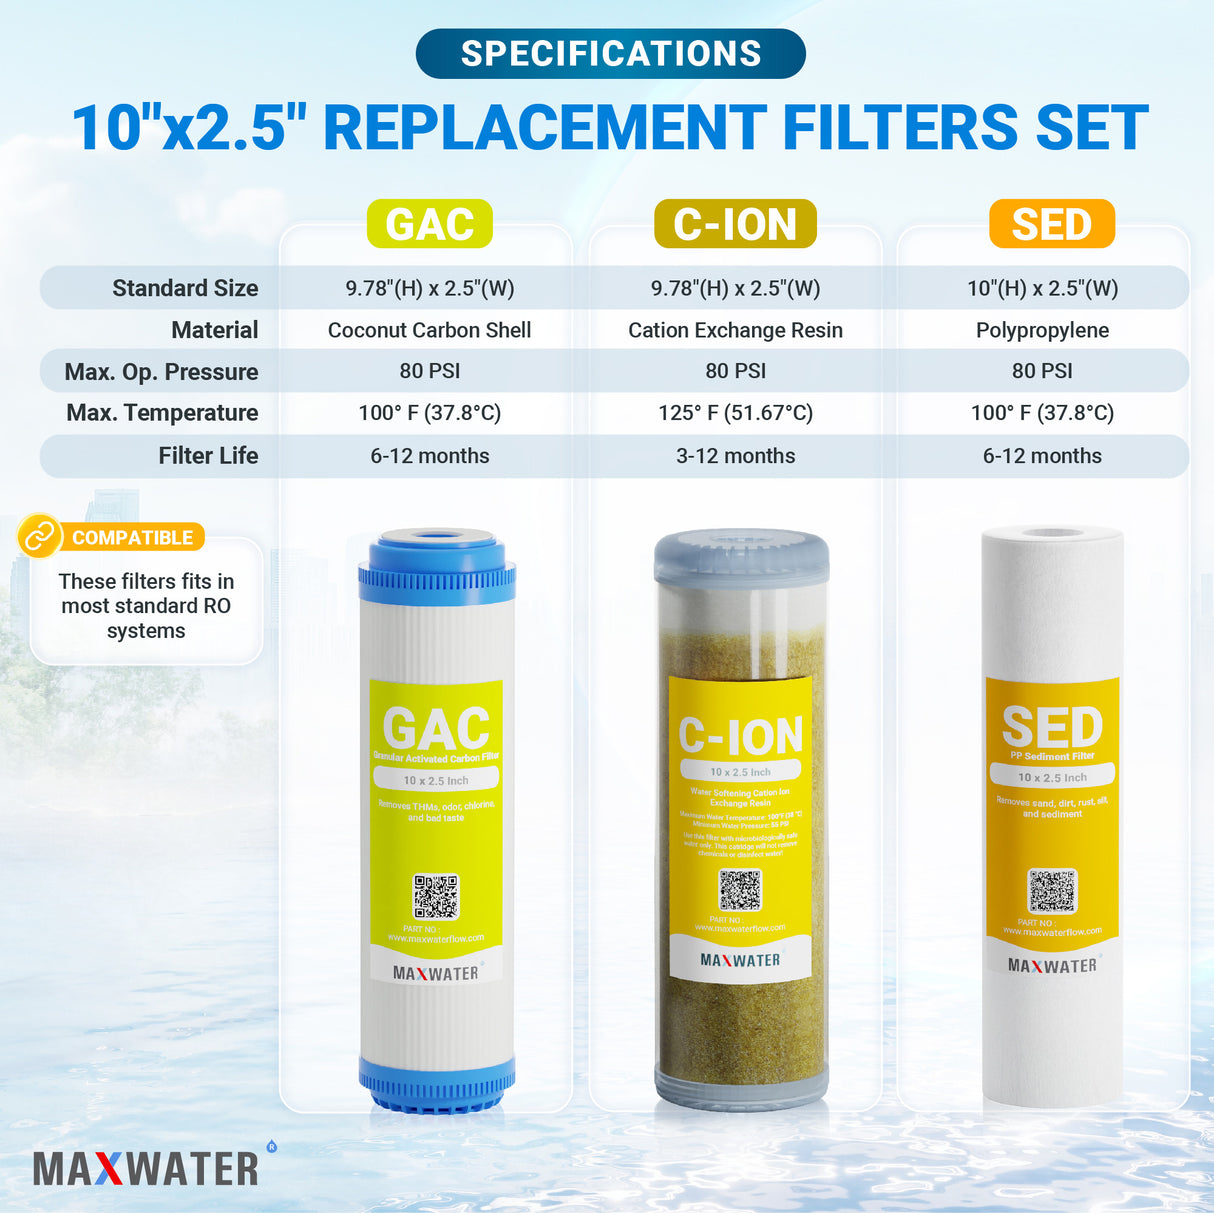 Cation resin replacement filter cartridge for water softening applications